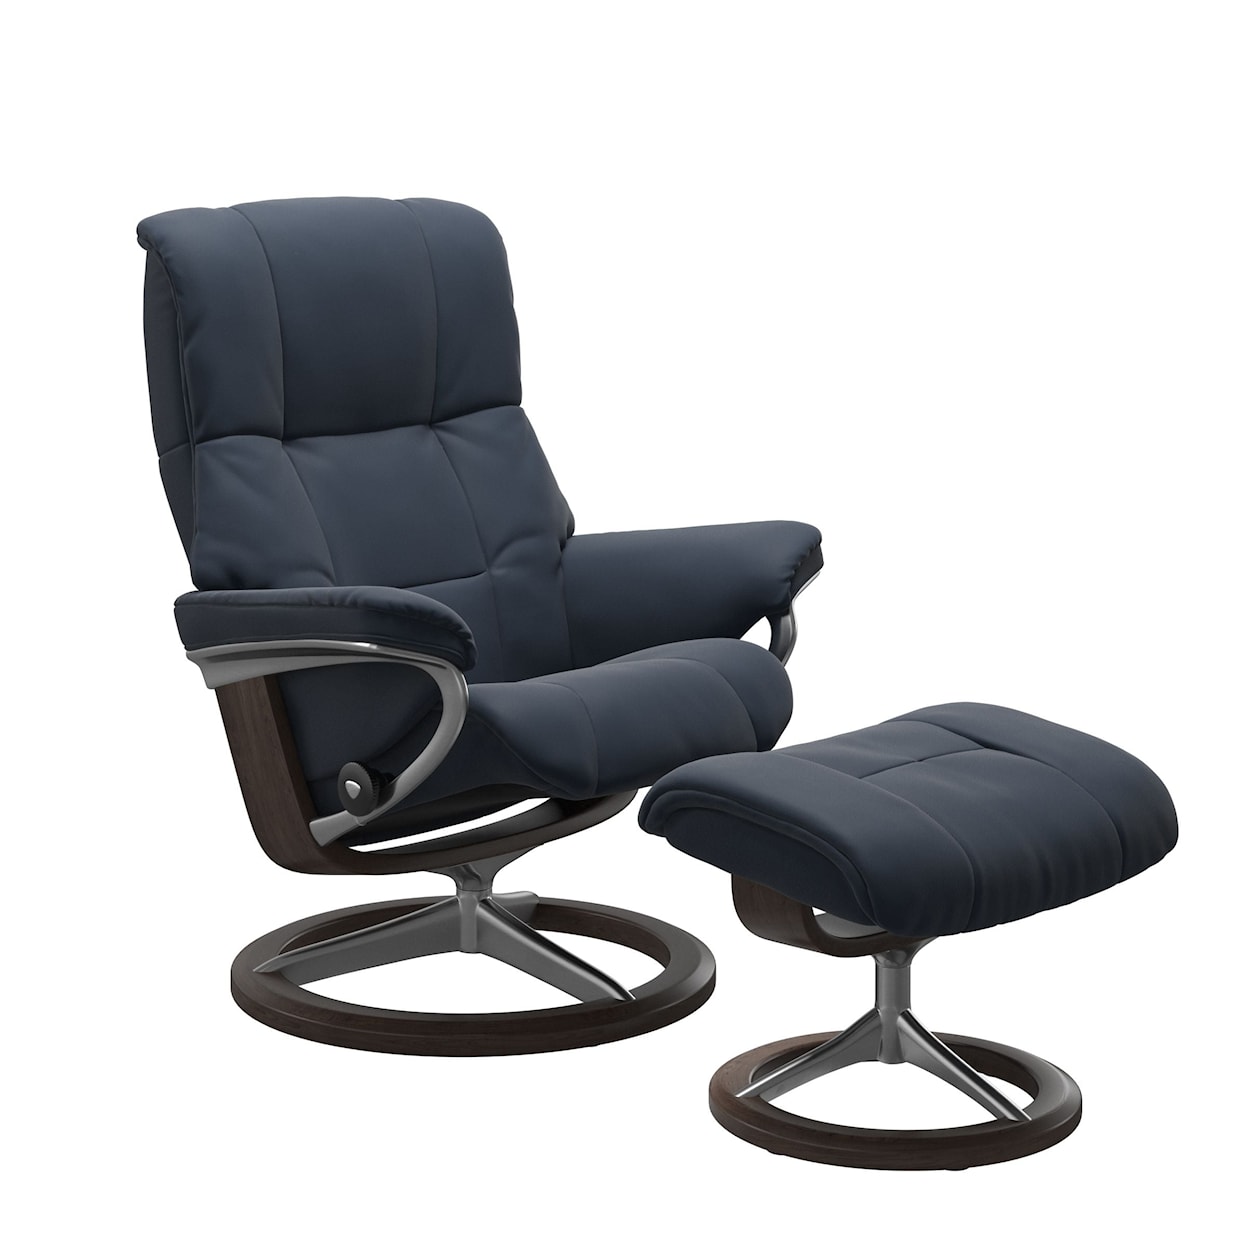 Stressless by Ekornes Mayfair Large Reclining Chair and Ottoman